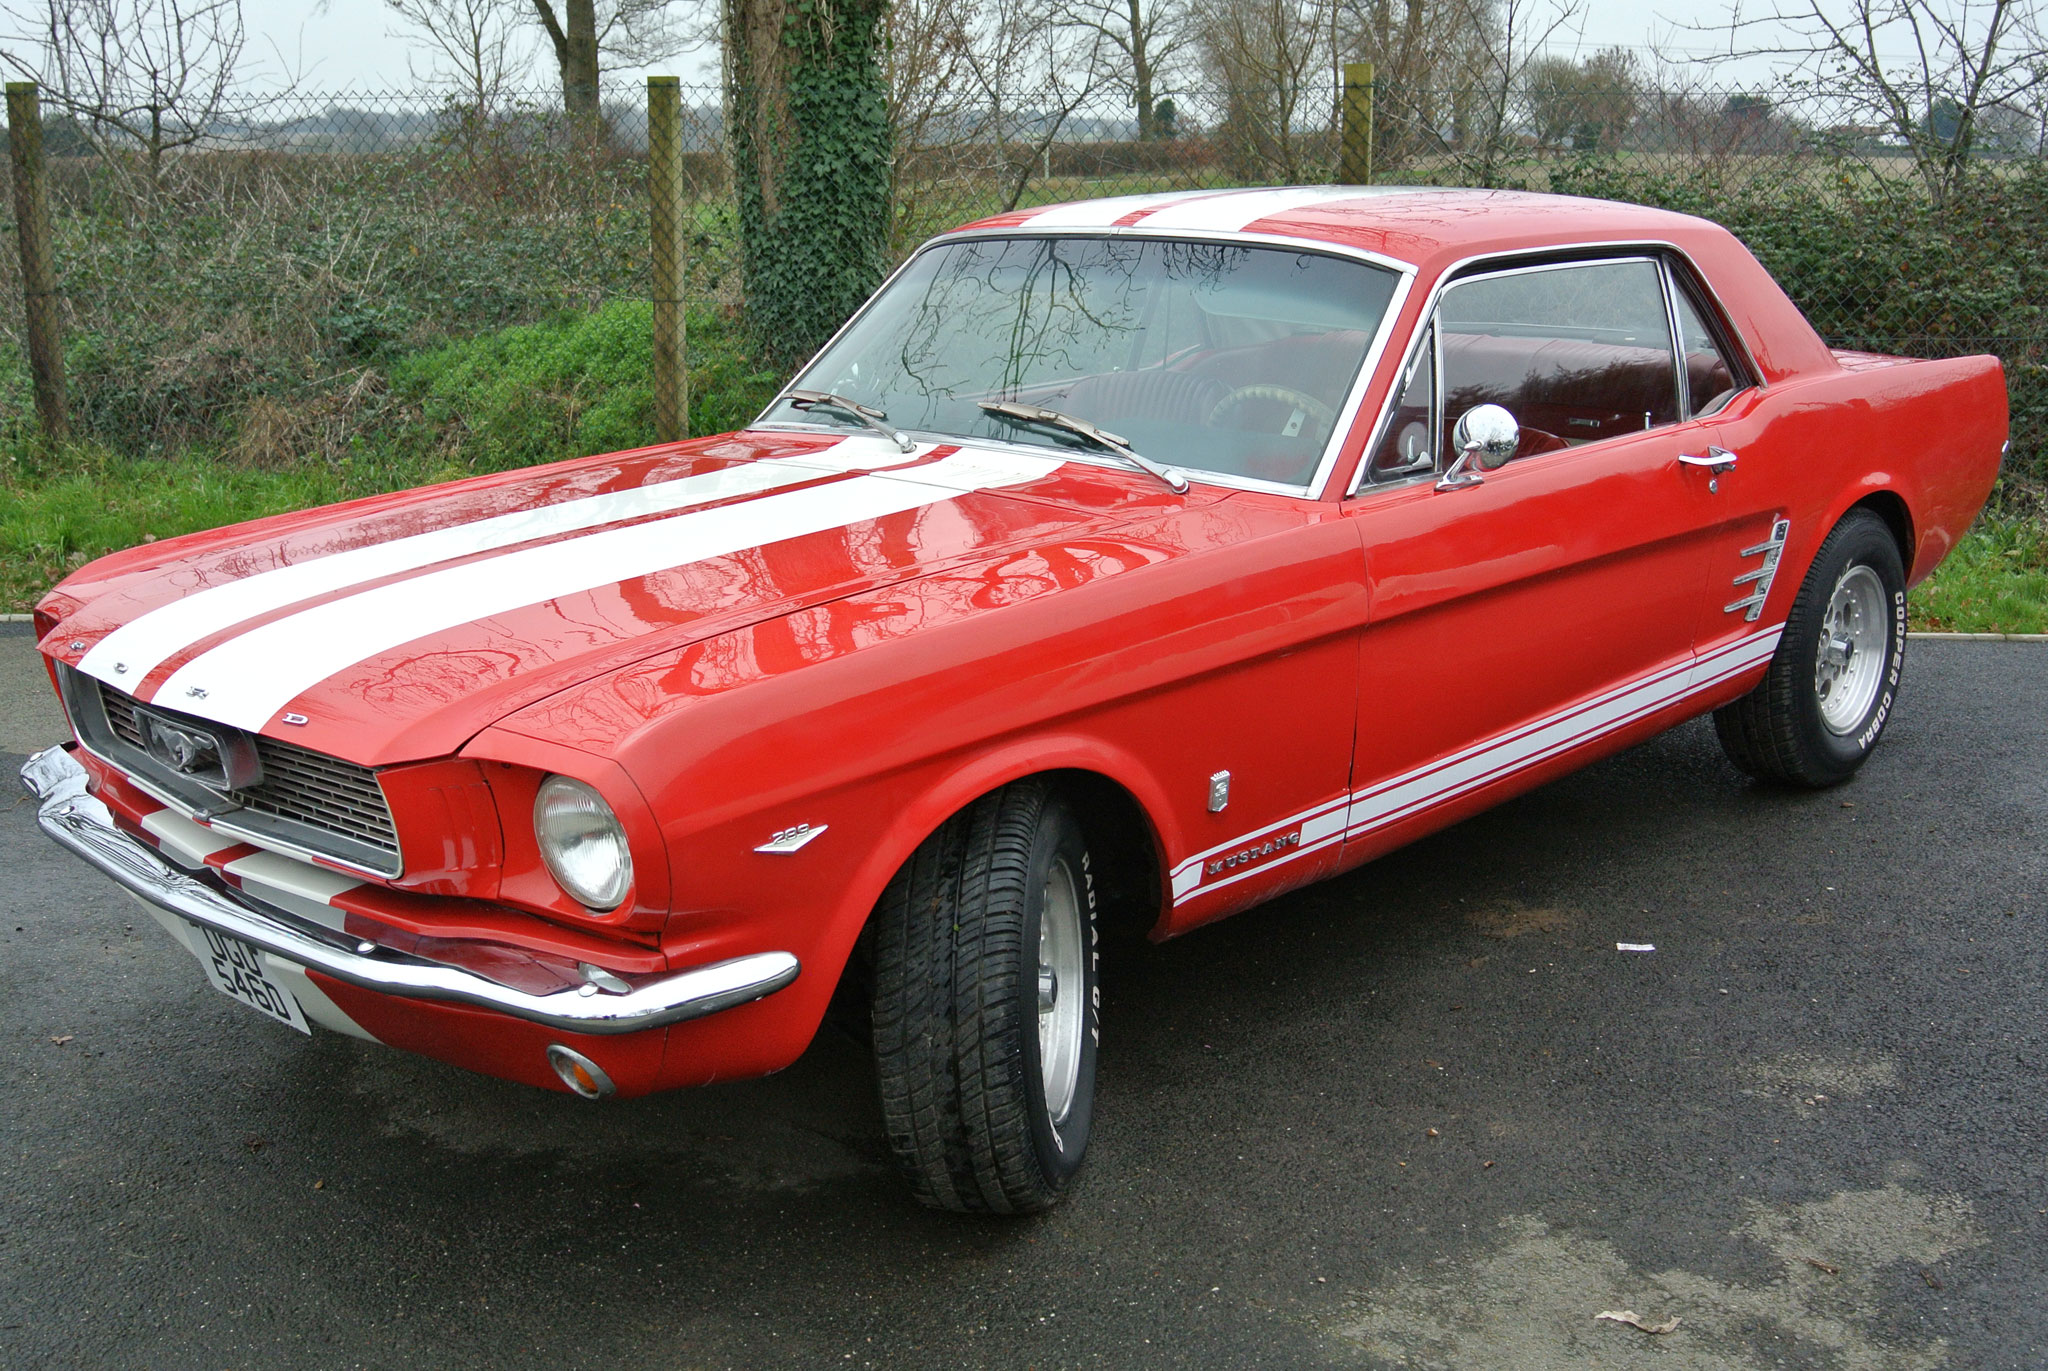 SOLD: "Andrea" 1966 Ford Mustang V8 4 Speed Manual Red - Oakwood Classics